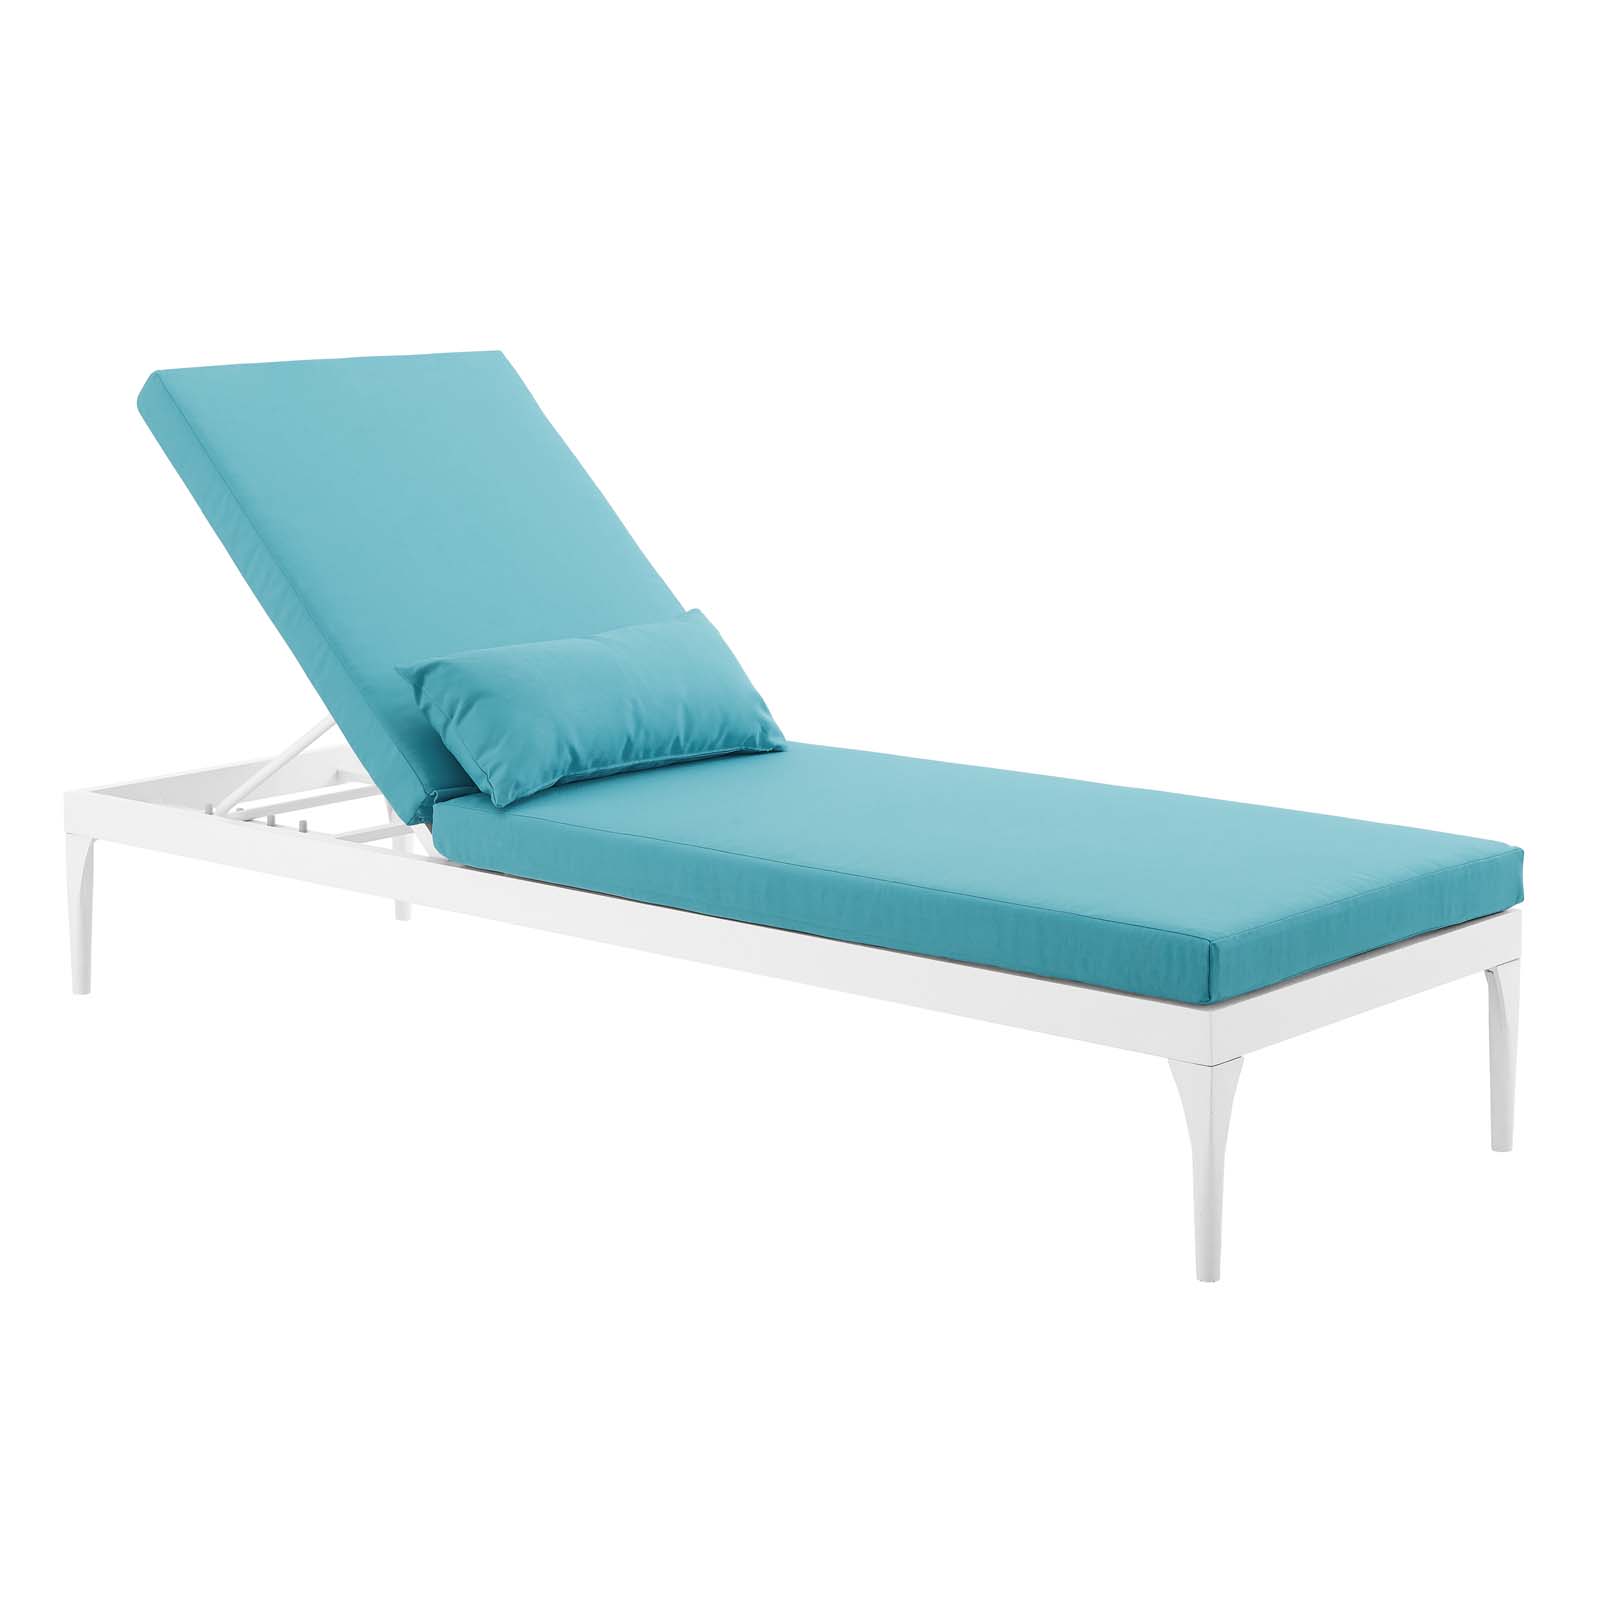 Modern Contemporary Urban Design Outdoor Patio Balcony Garden Furniture Lounge Chair Chaise, Fabric Metal Steel, White Blue - image 5 of 7